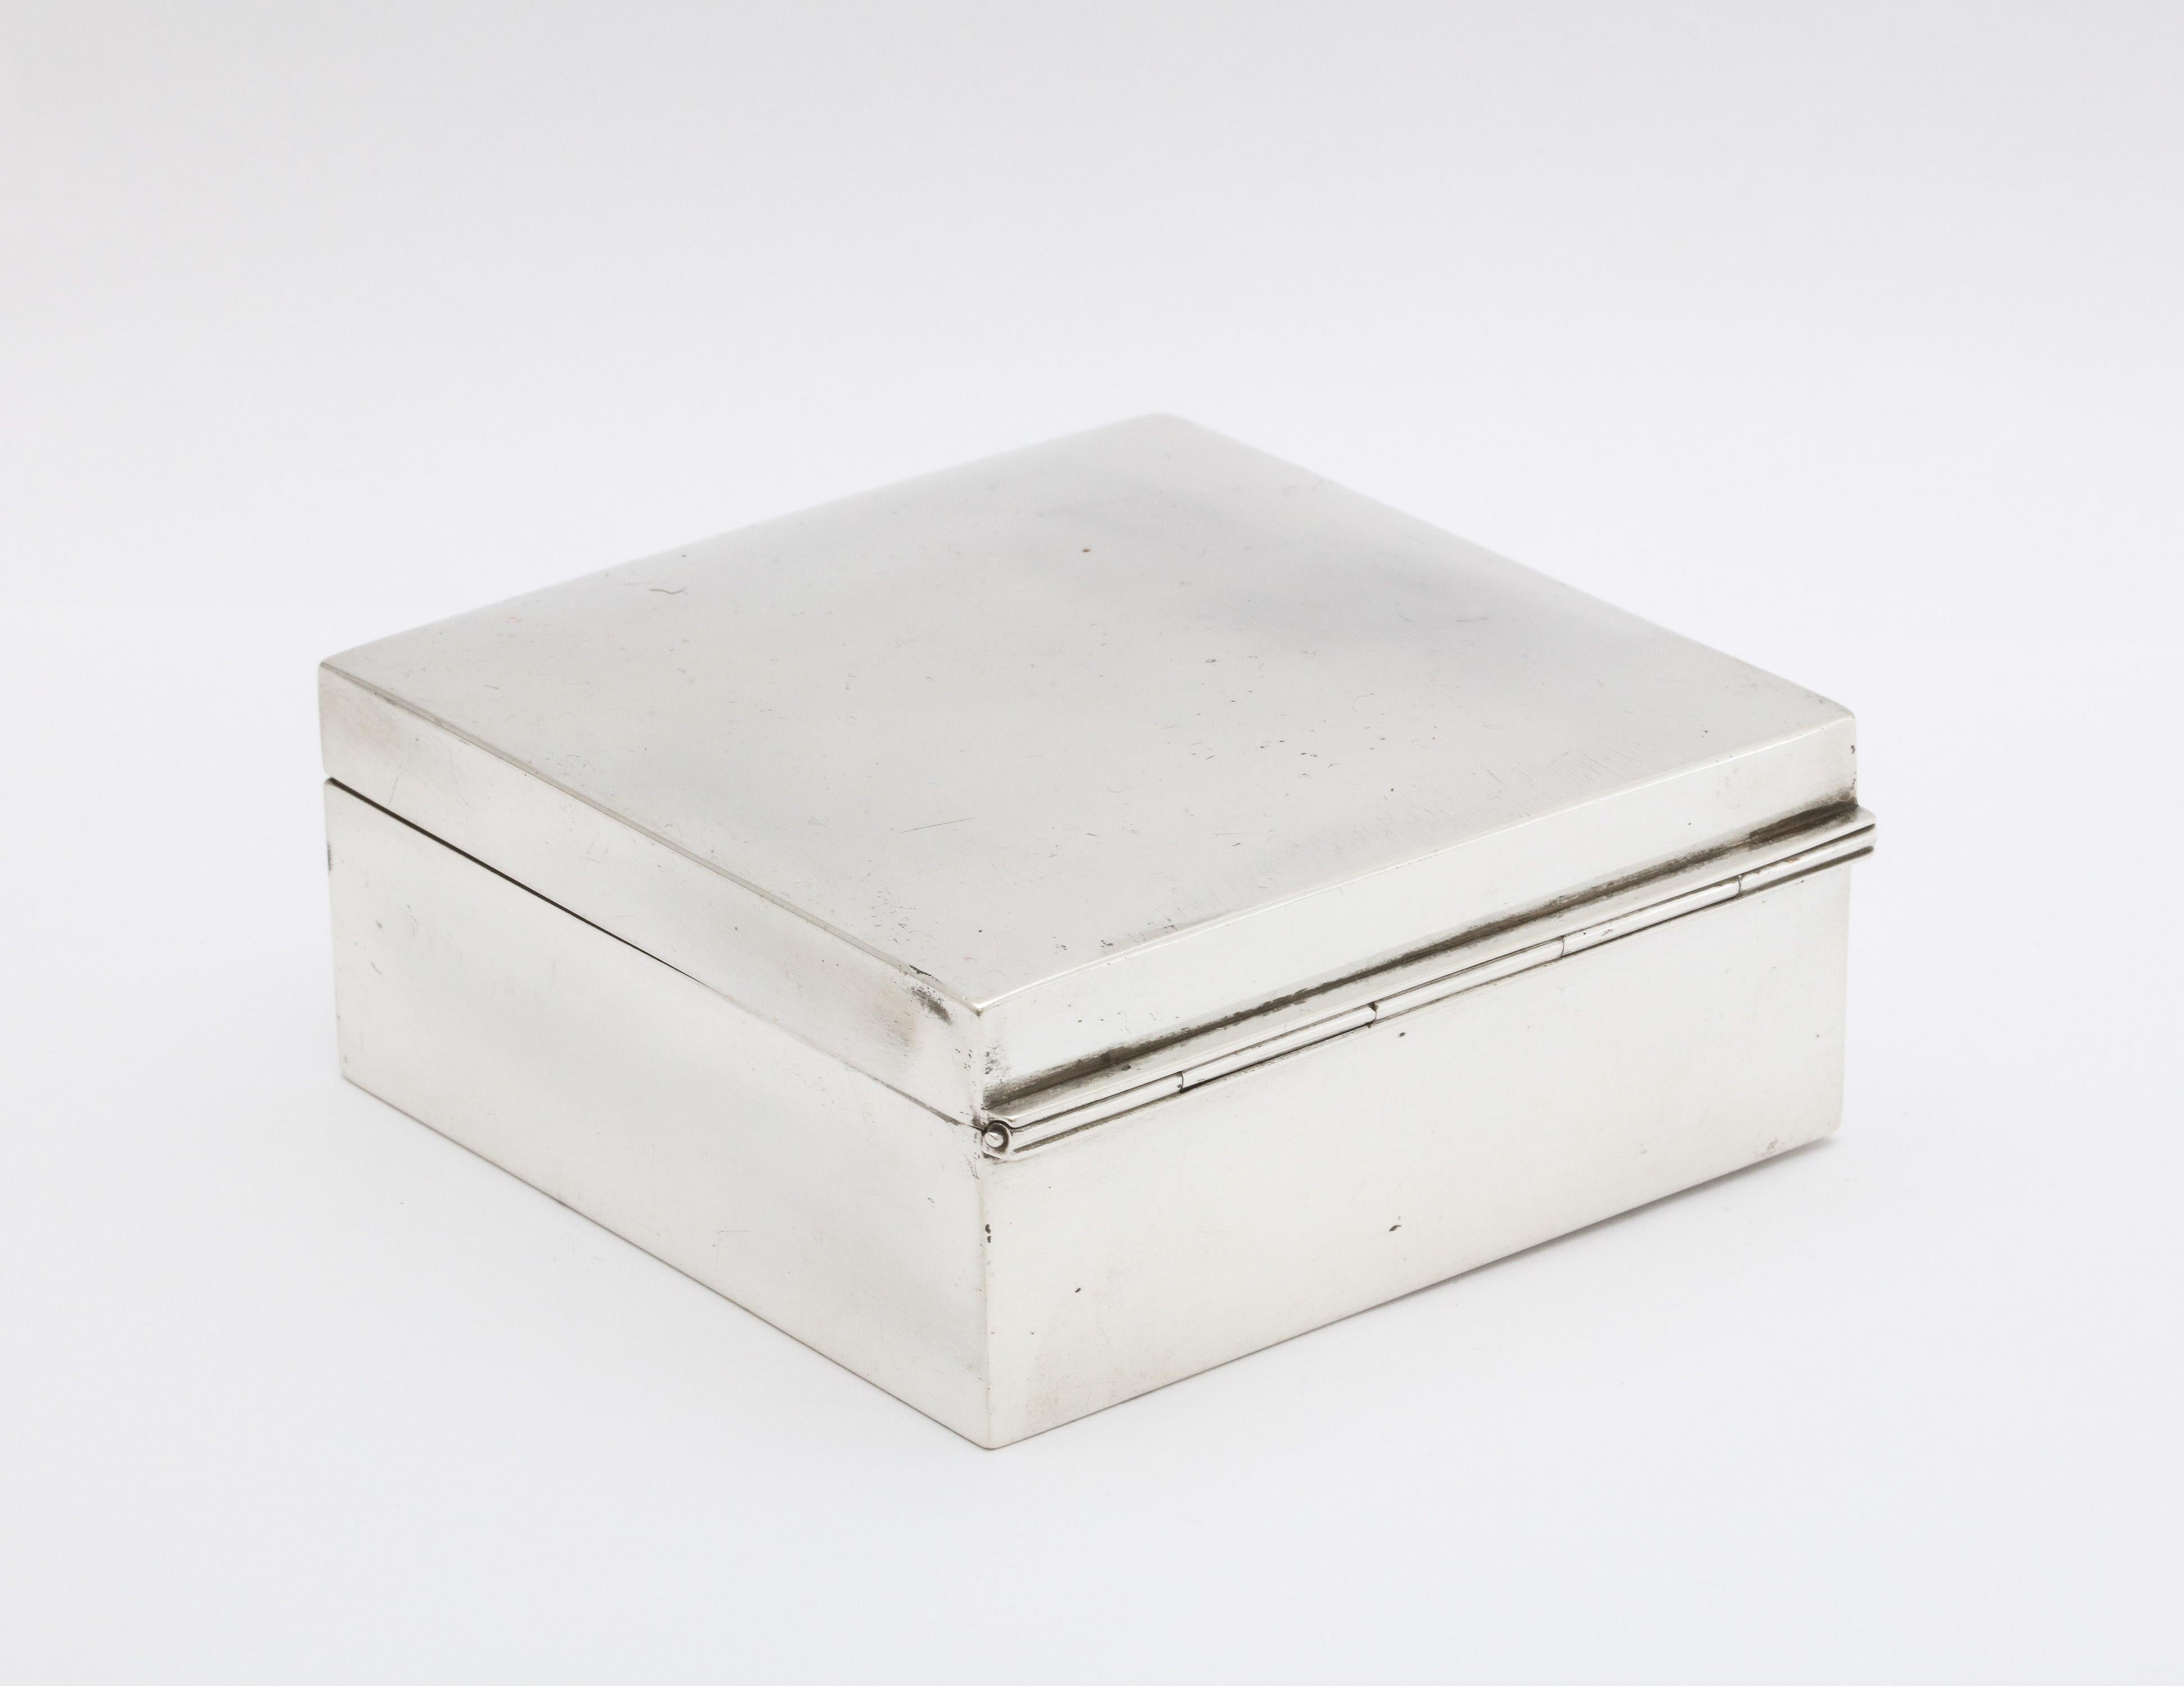 American Art Deco Sterling Silver Table Box with Hinged Lid by Shreve & Co.